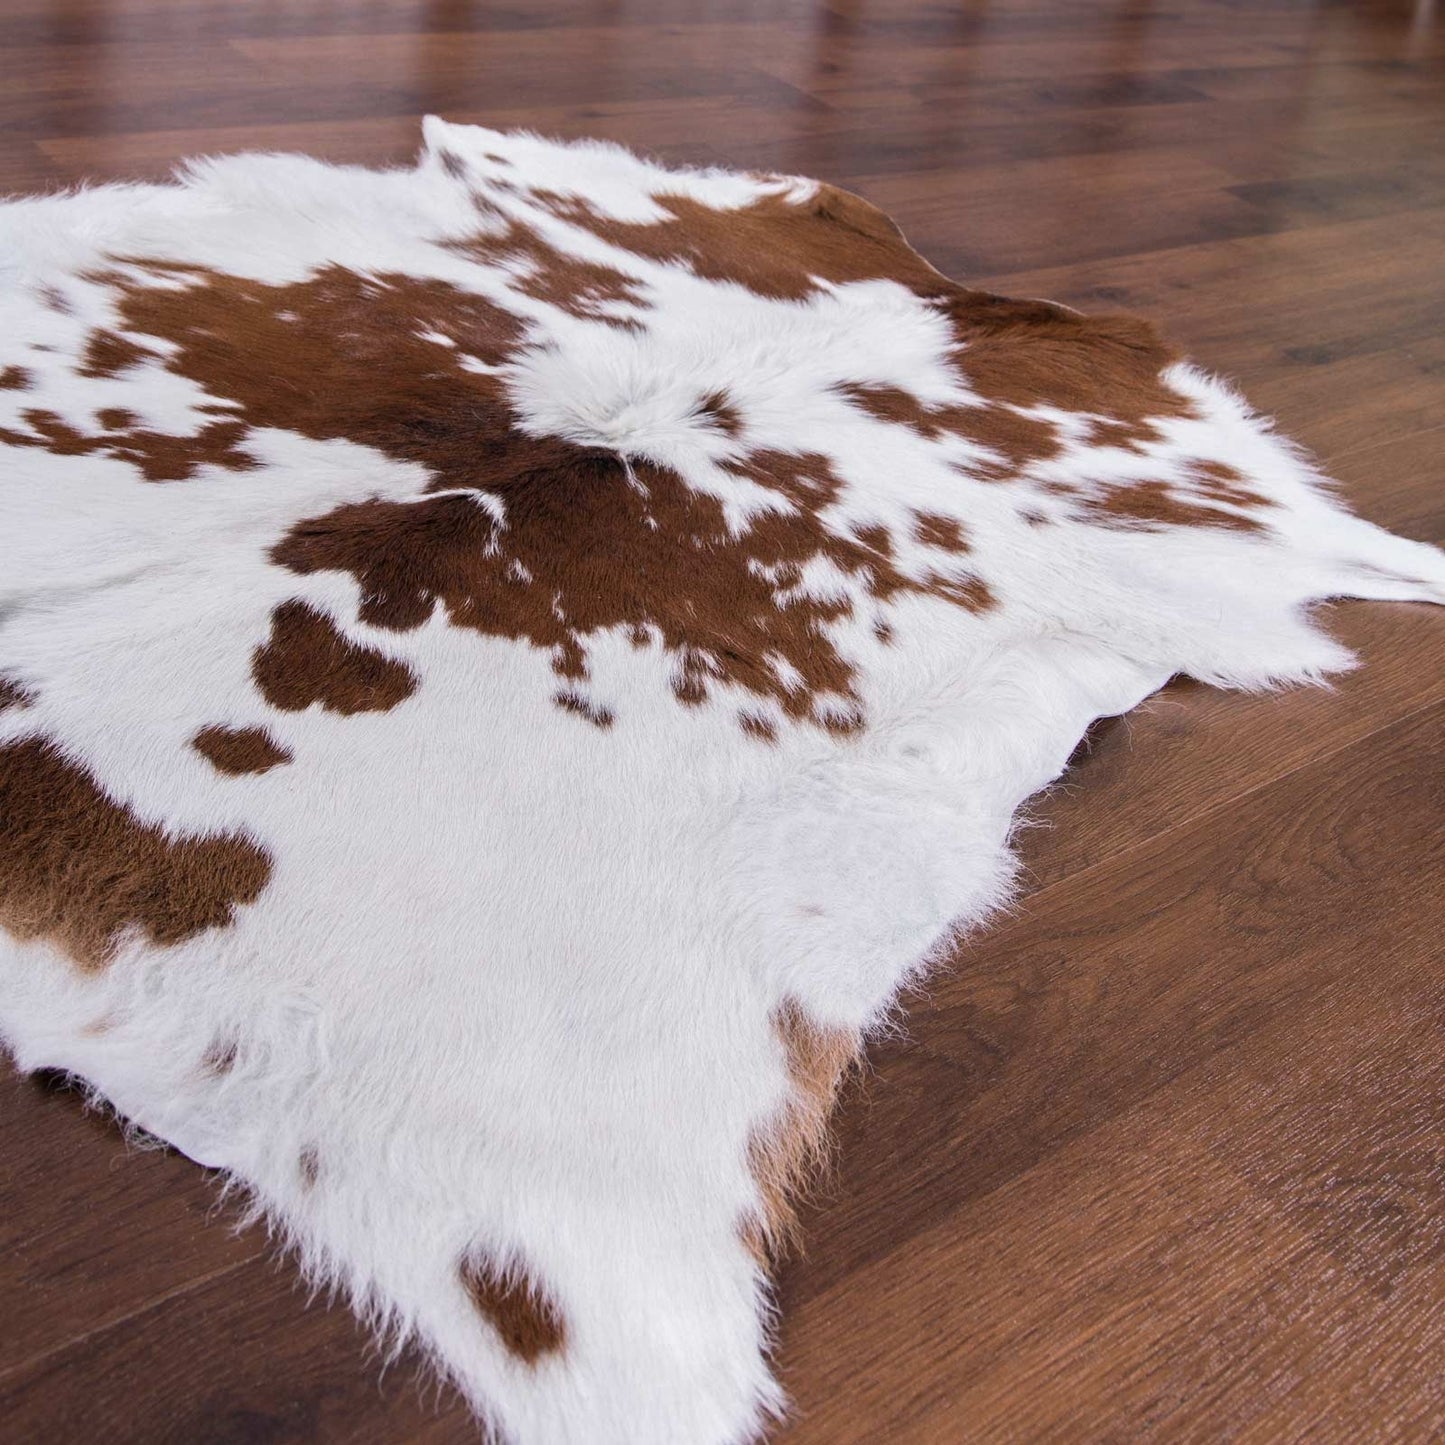 Brown and White Calf Skin Rug - Rodeo Cowhide Rugs